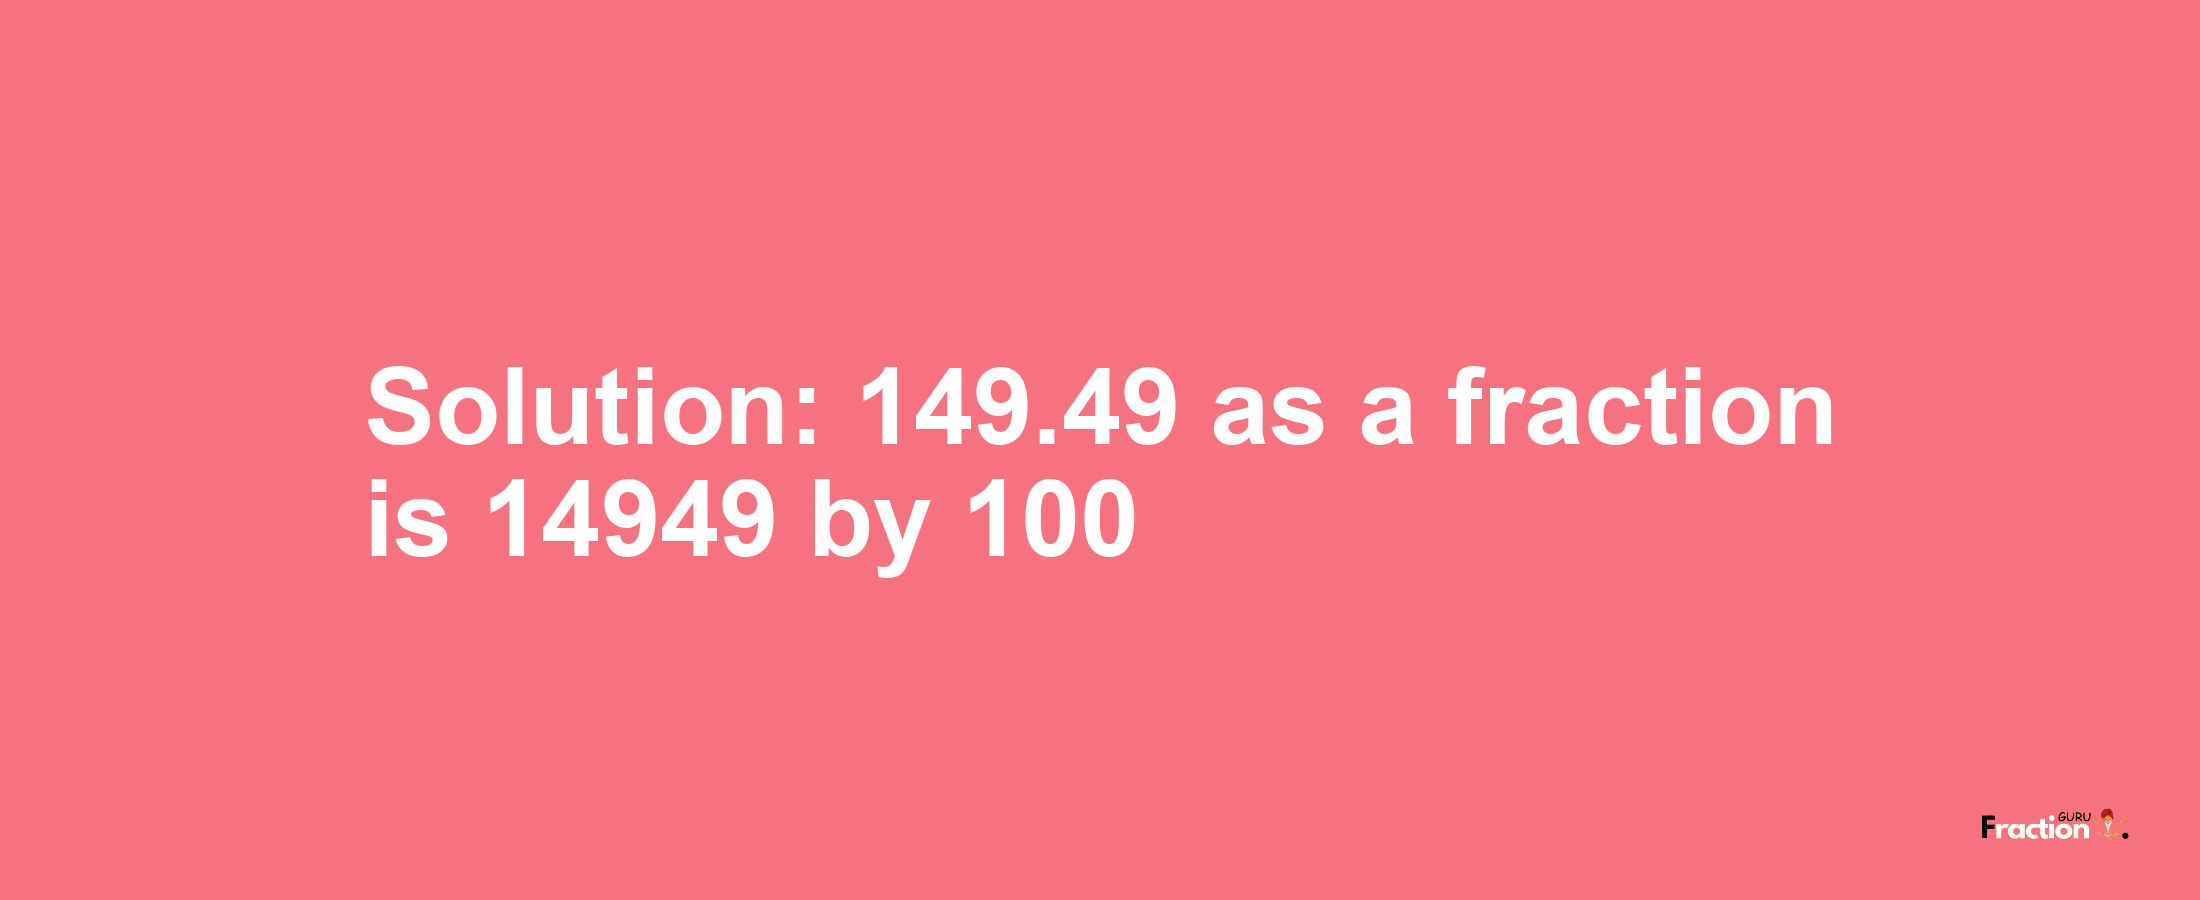 Solution:149.49 as a fraction is 14949/100